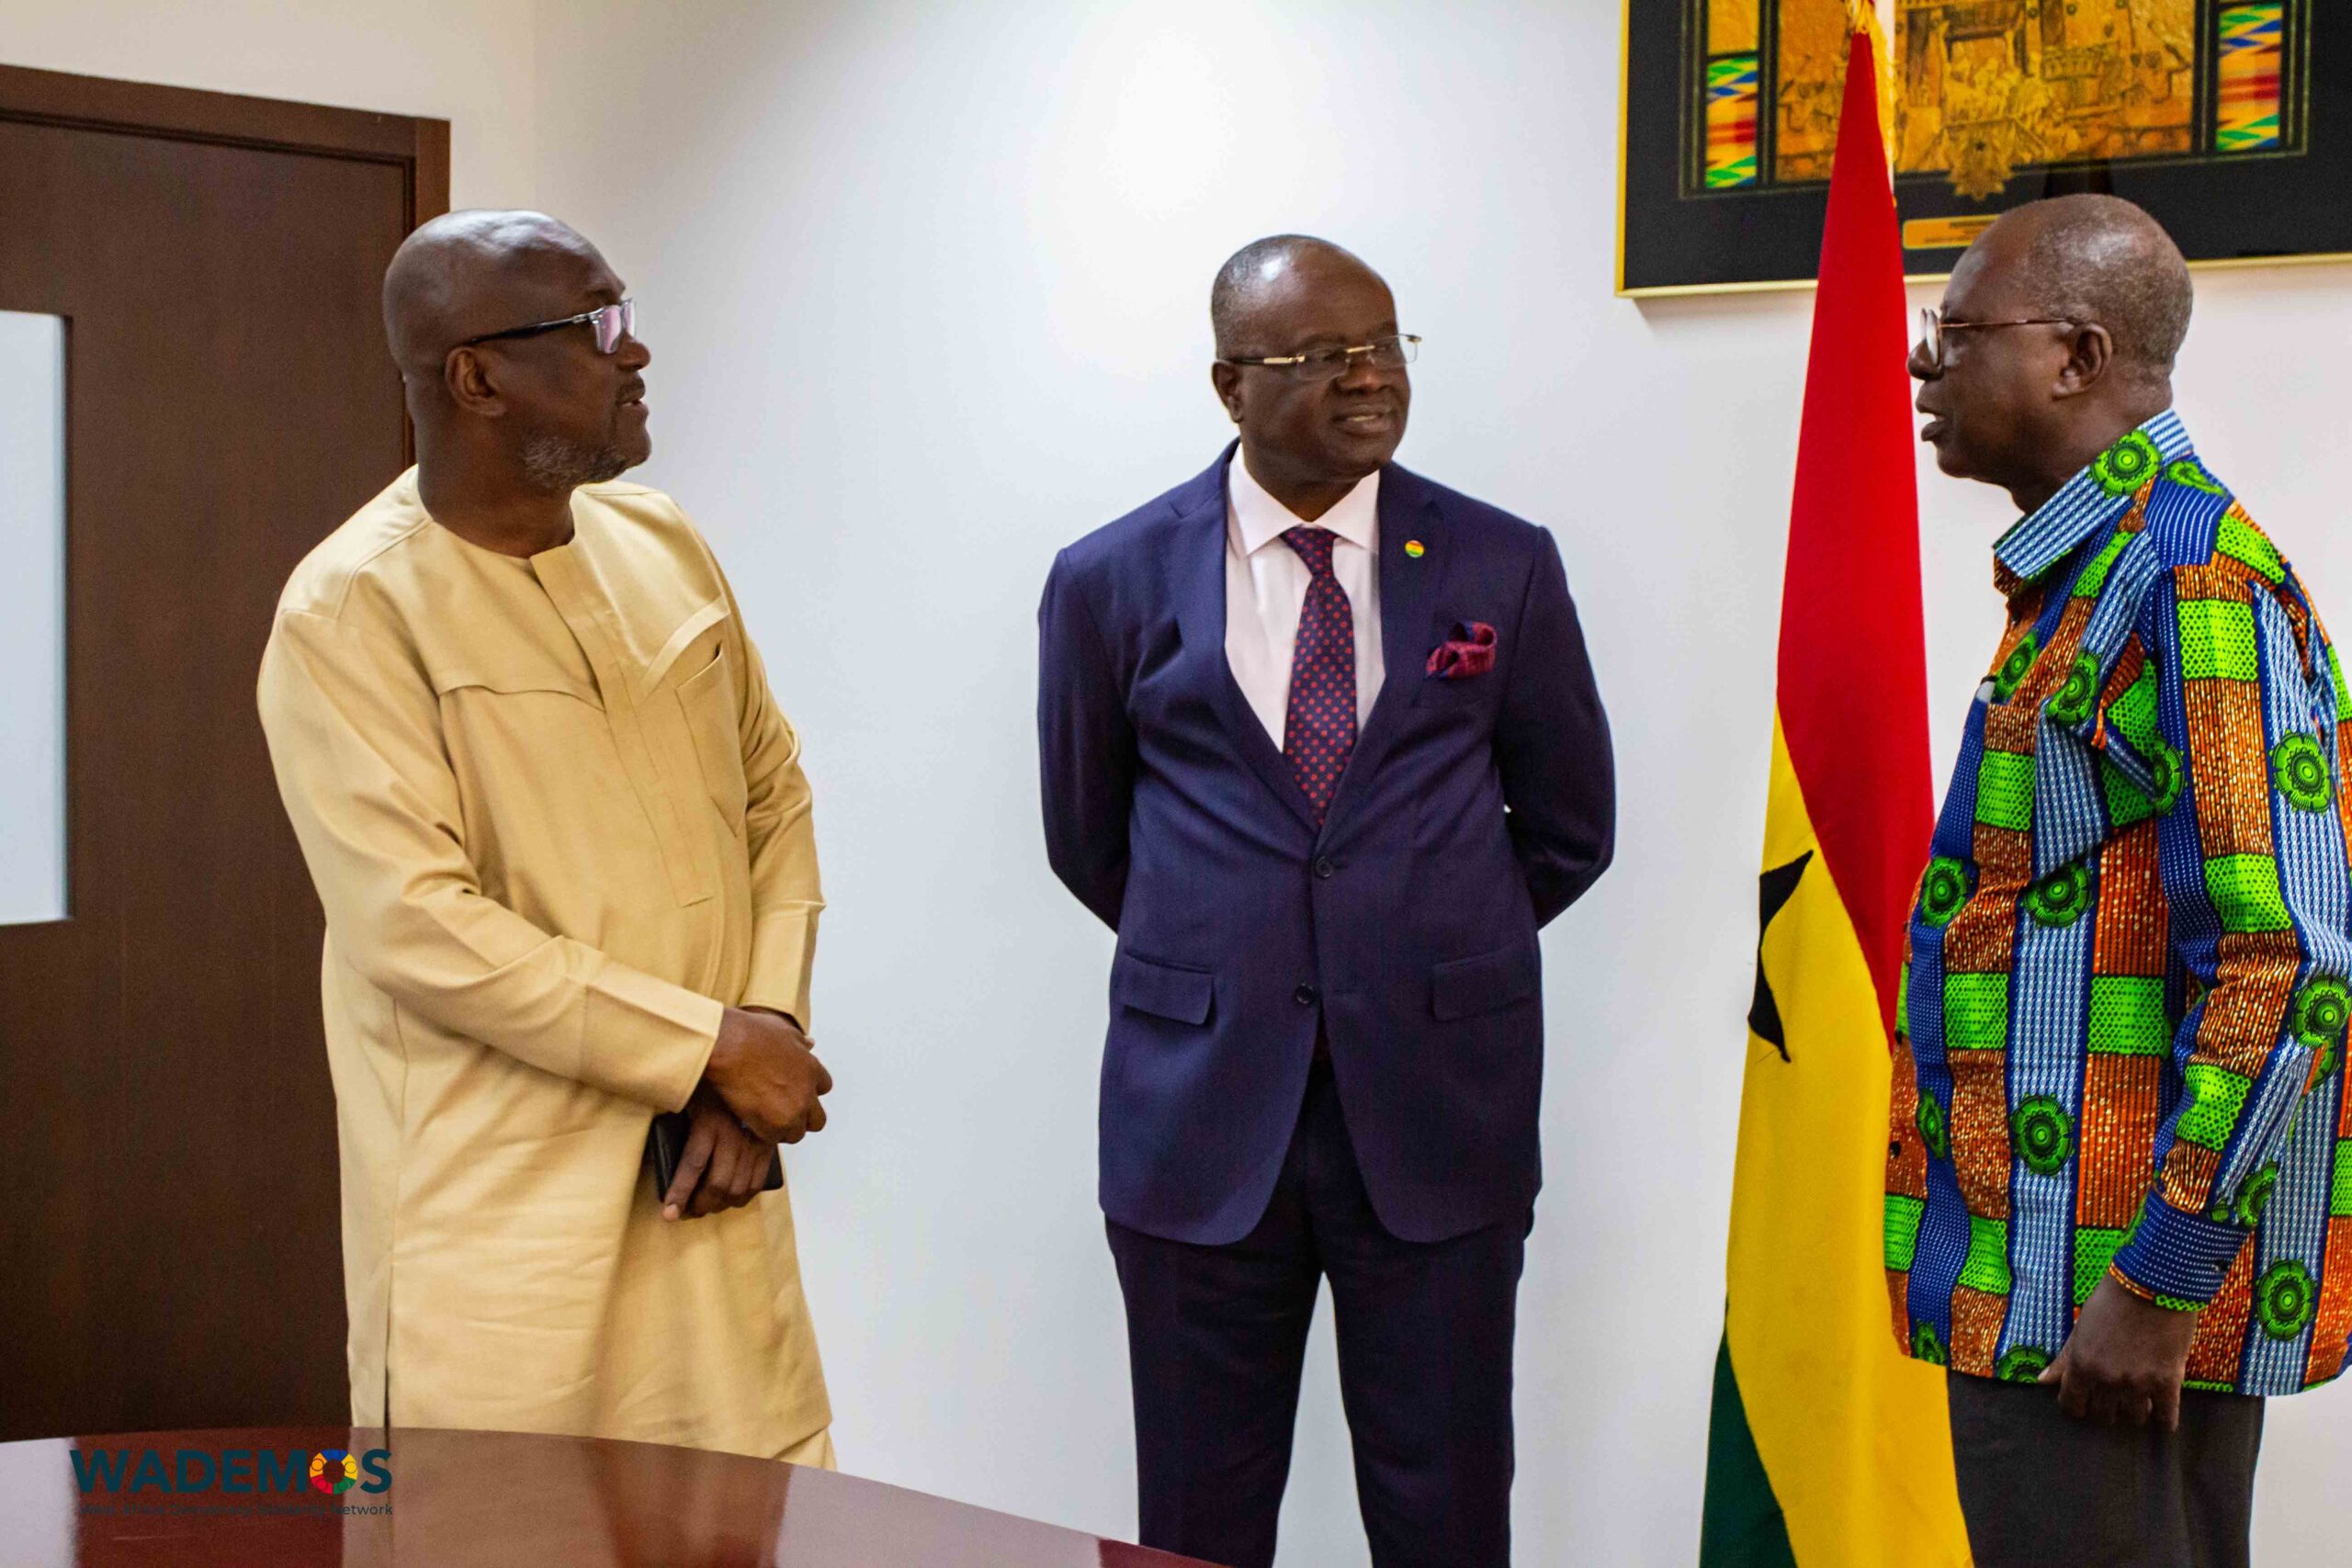 WADEMOS pays a courtesy call to Ghana's Foreign Affairs Minister 